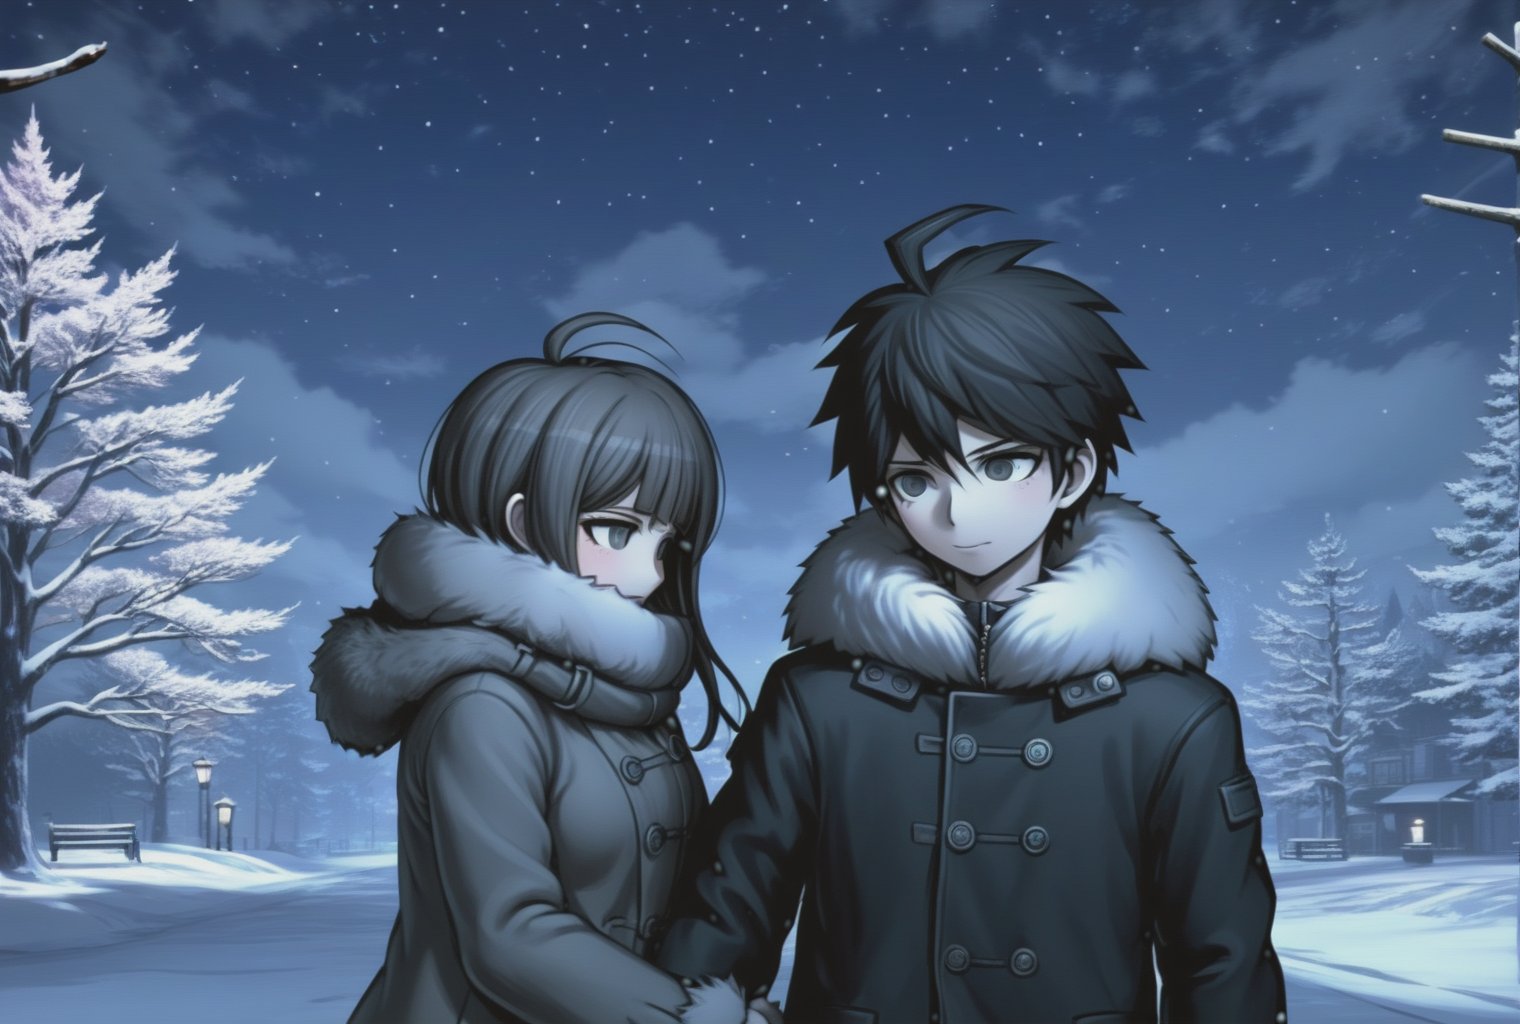 a couple, tender embrace, romantic scenery, moonlit night, silhouette figures, soft illumination, close connection, loving gestures, dreamlike ambiance, cozy atmosphere, warm clothing, winter wonderland, snowy background, handholding, fur coat, cuddle position, content expressions, danganronpa style, thick lines, full-body portrait, detailed eyes, close-up, <lora:danganronpa_style:0.8>